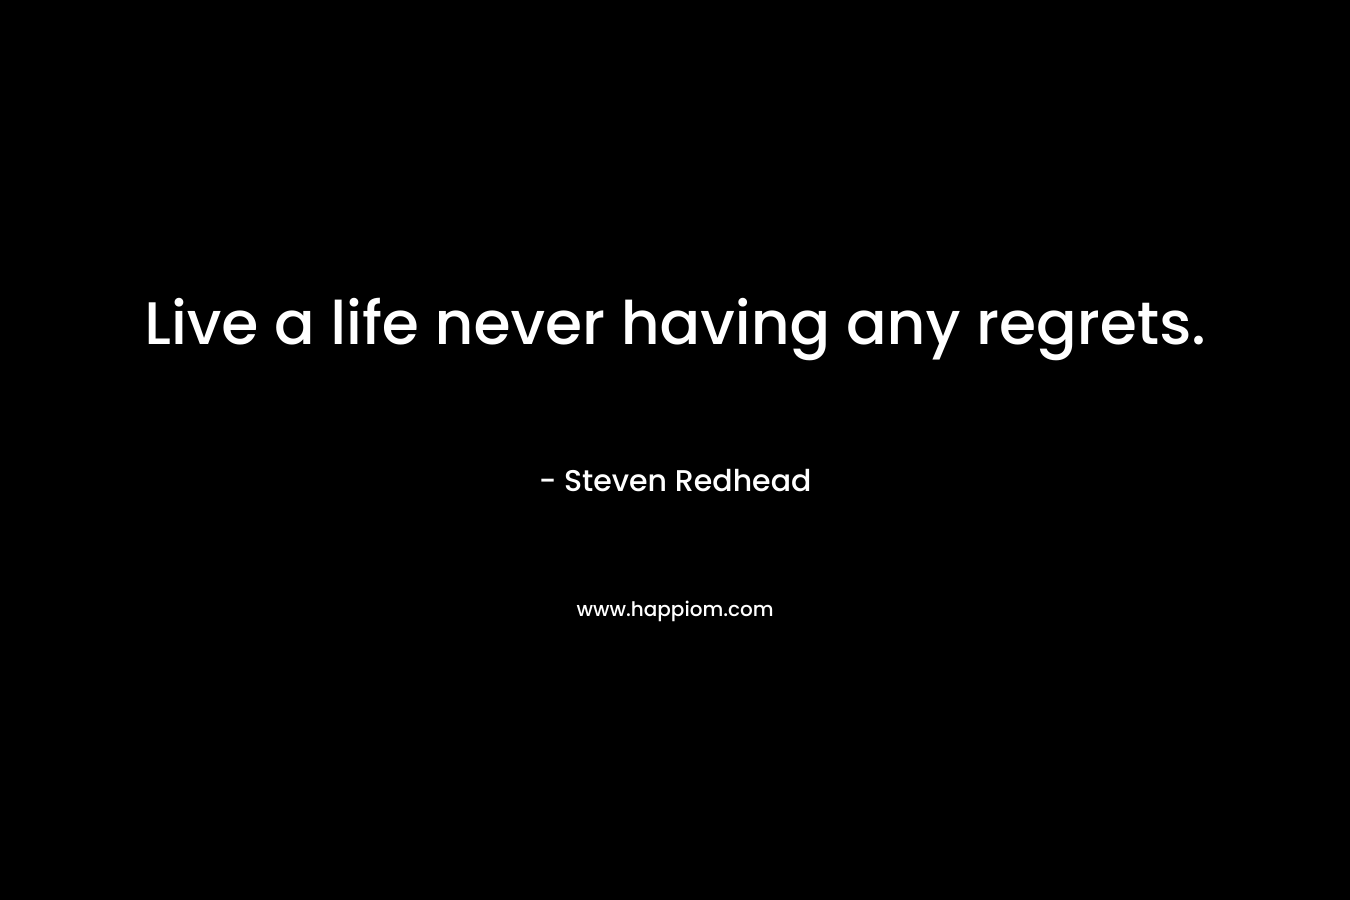 Live a life never having any regrets.